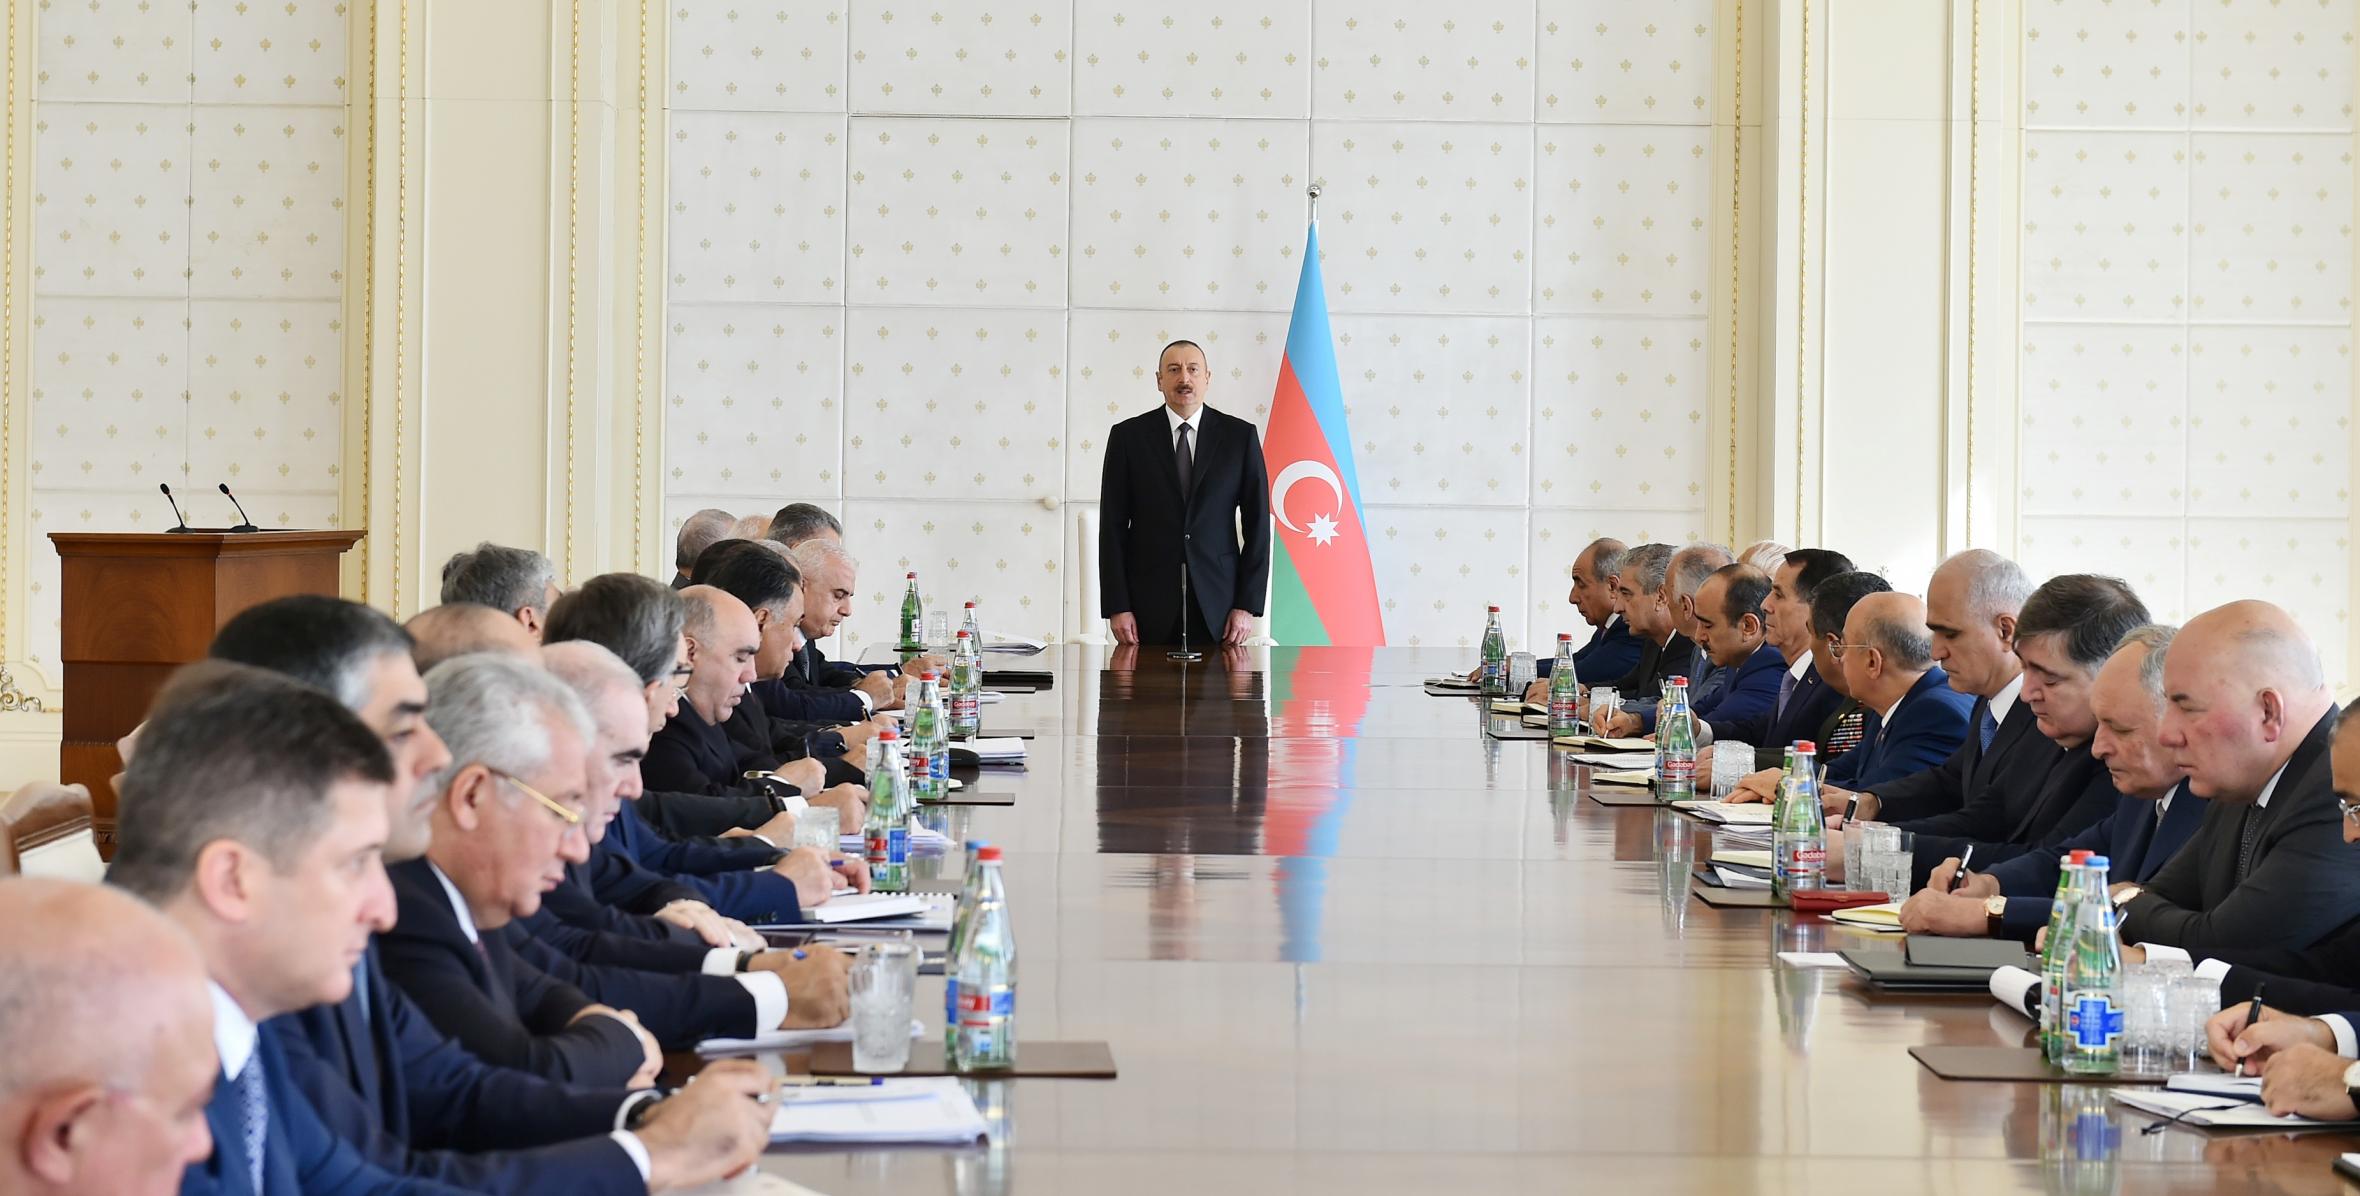 Opening speech by Ilham Aliyev at the meeting of Cabinet meeting on results of socio-economic development in first half of 2017 and future objectives